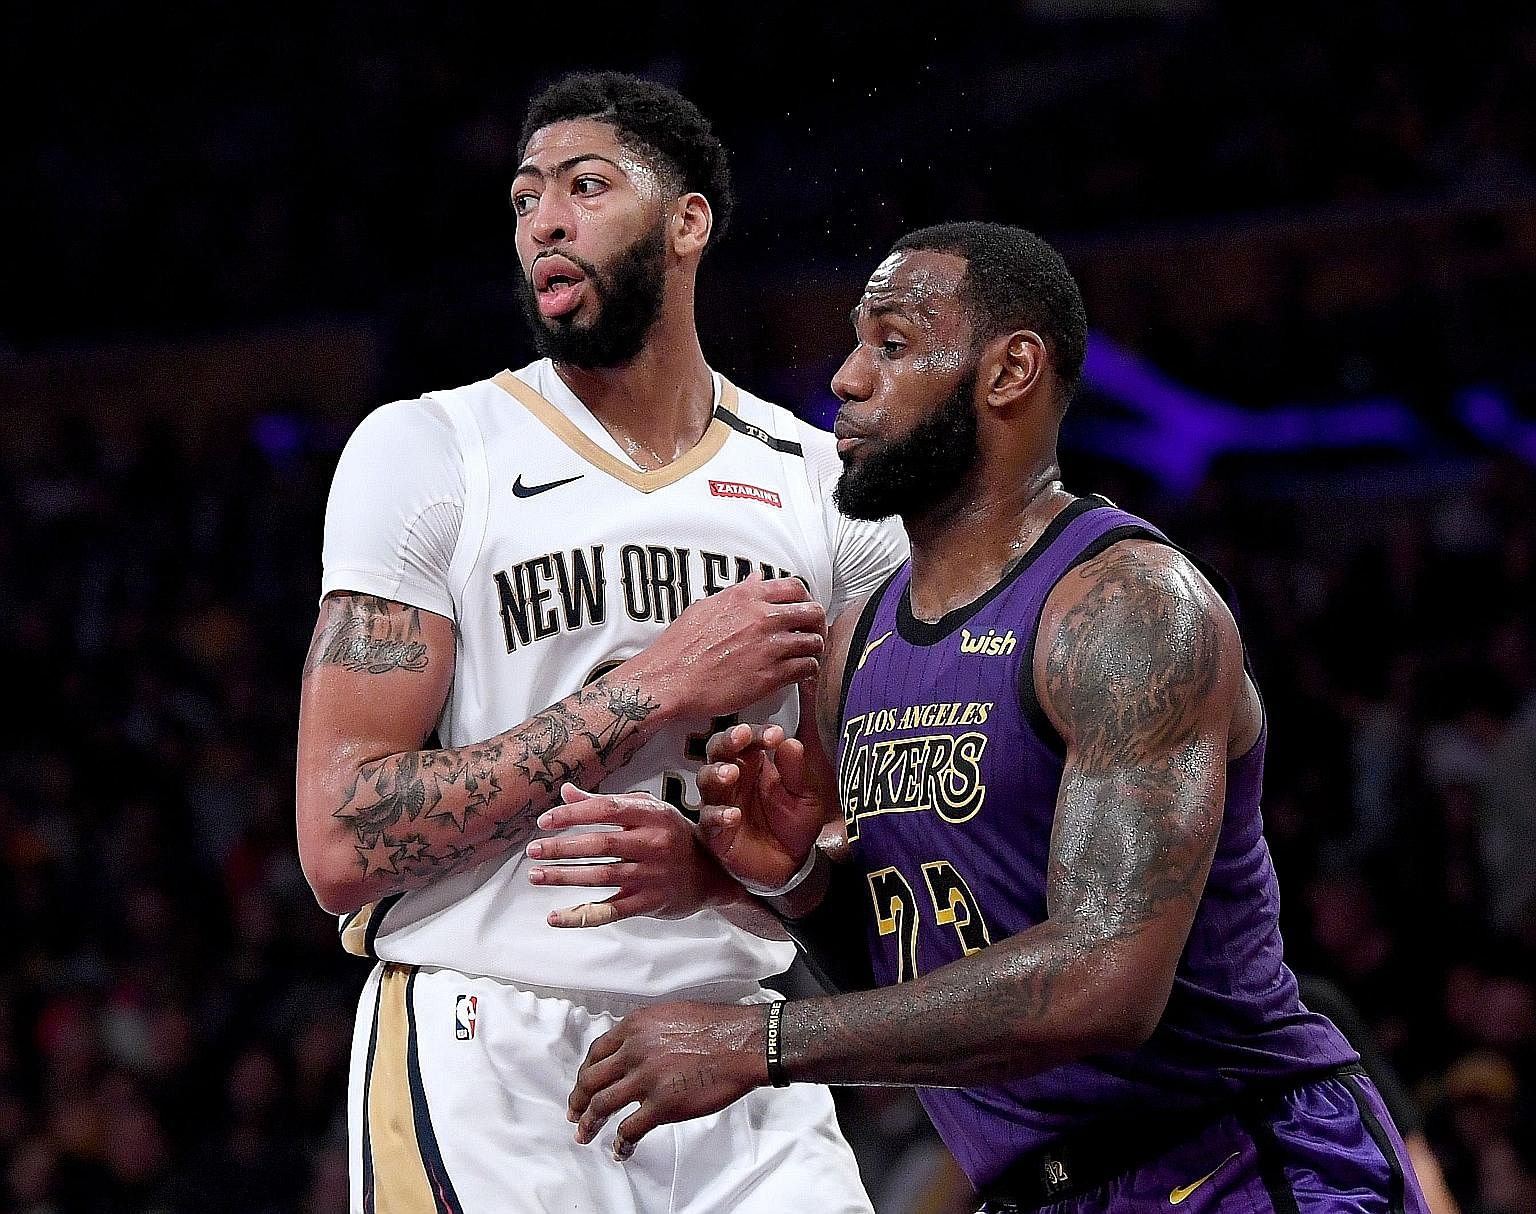 Los Angeles Lakers star LeBron James guarding Anthony Davis during their 112-104 win over the New Orleans Pelicans at the Staples Centre last December. They will play together next season as the Lakers aim to make the play-offs for the first time sin